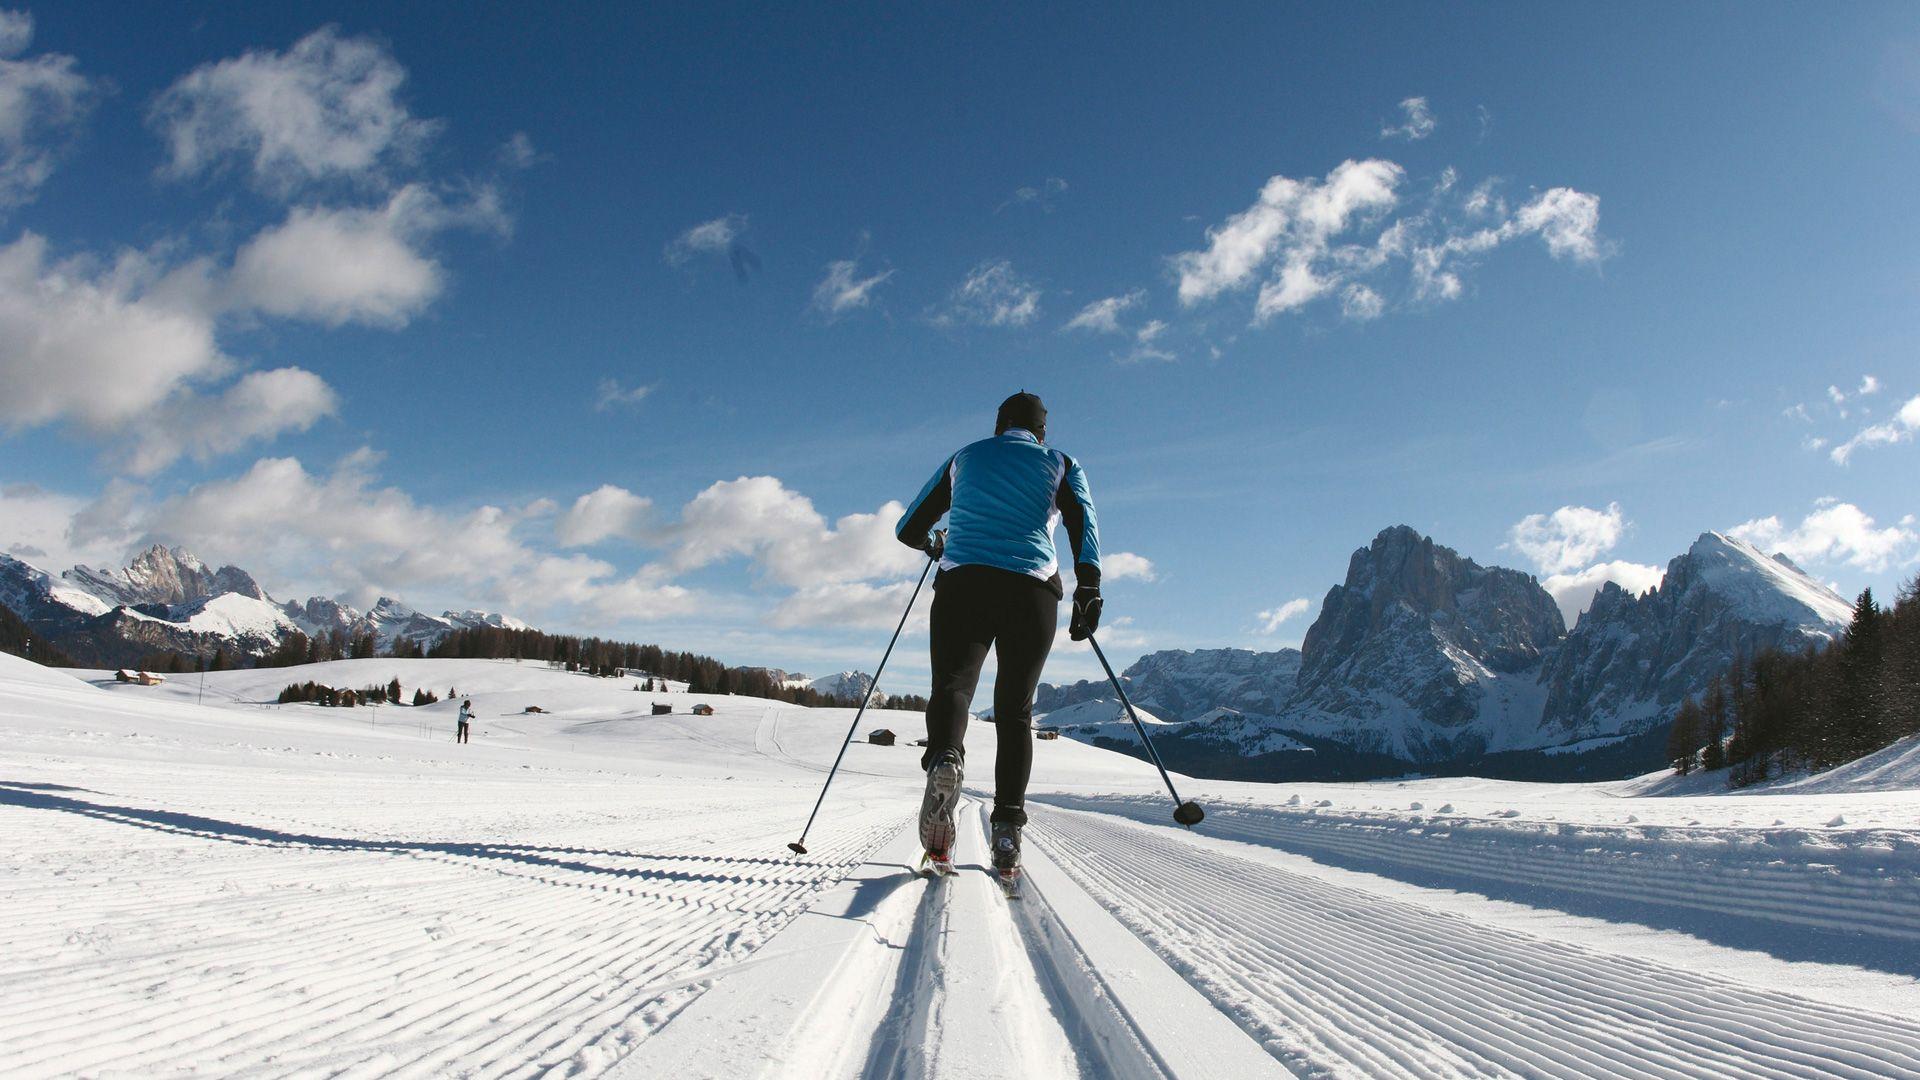 Cross Country Skiing Wallpaper 53333 1920x1080px